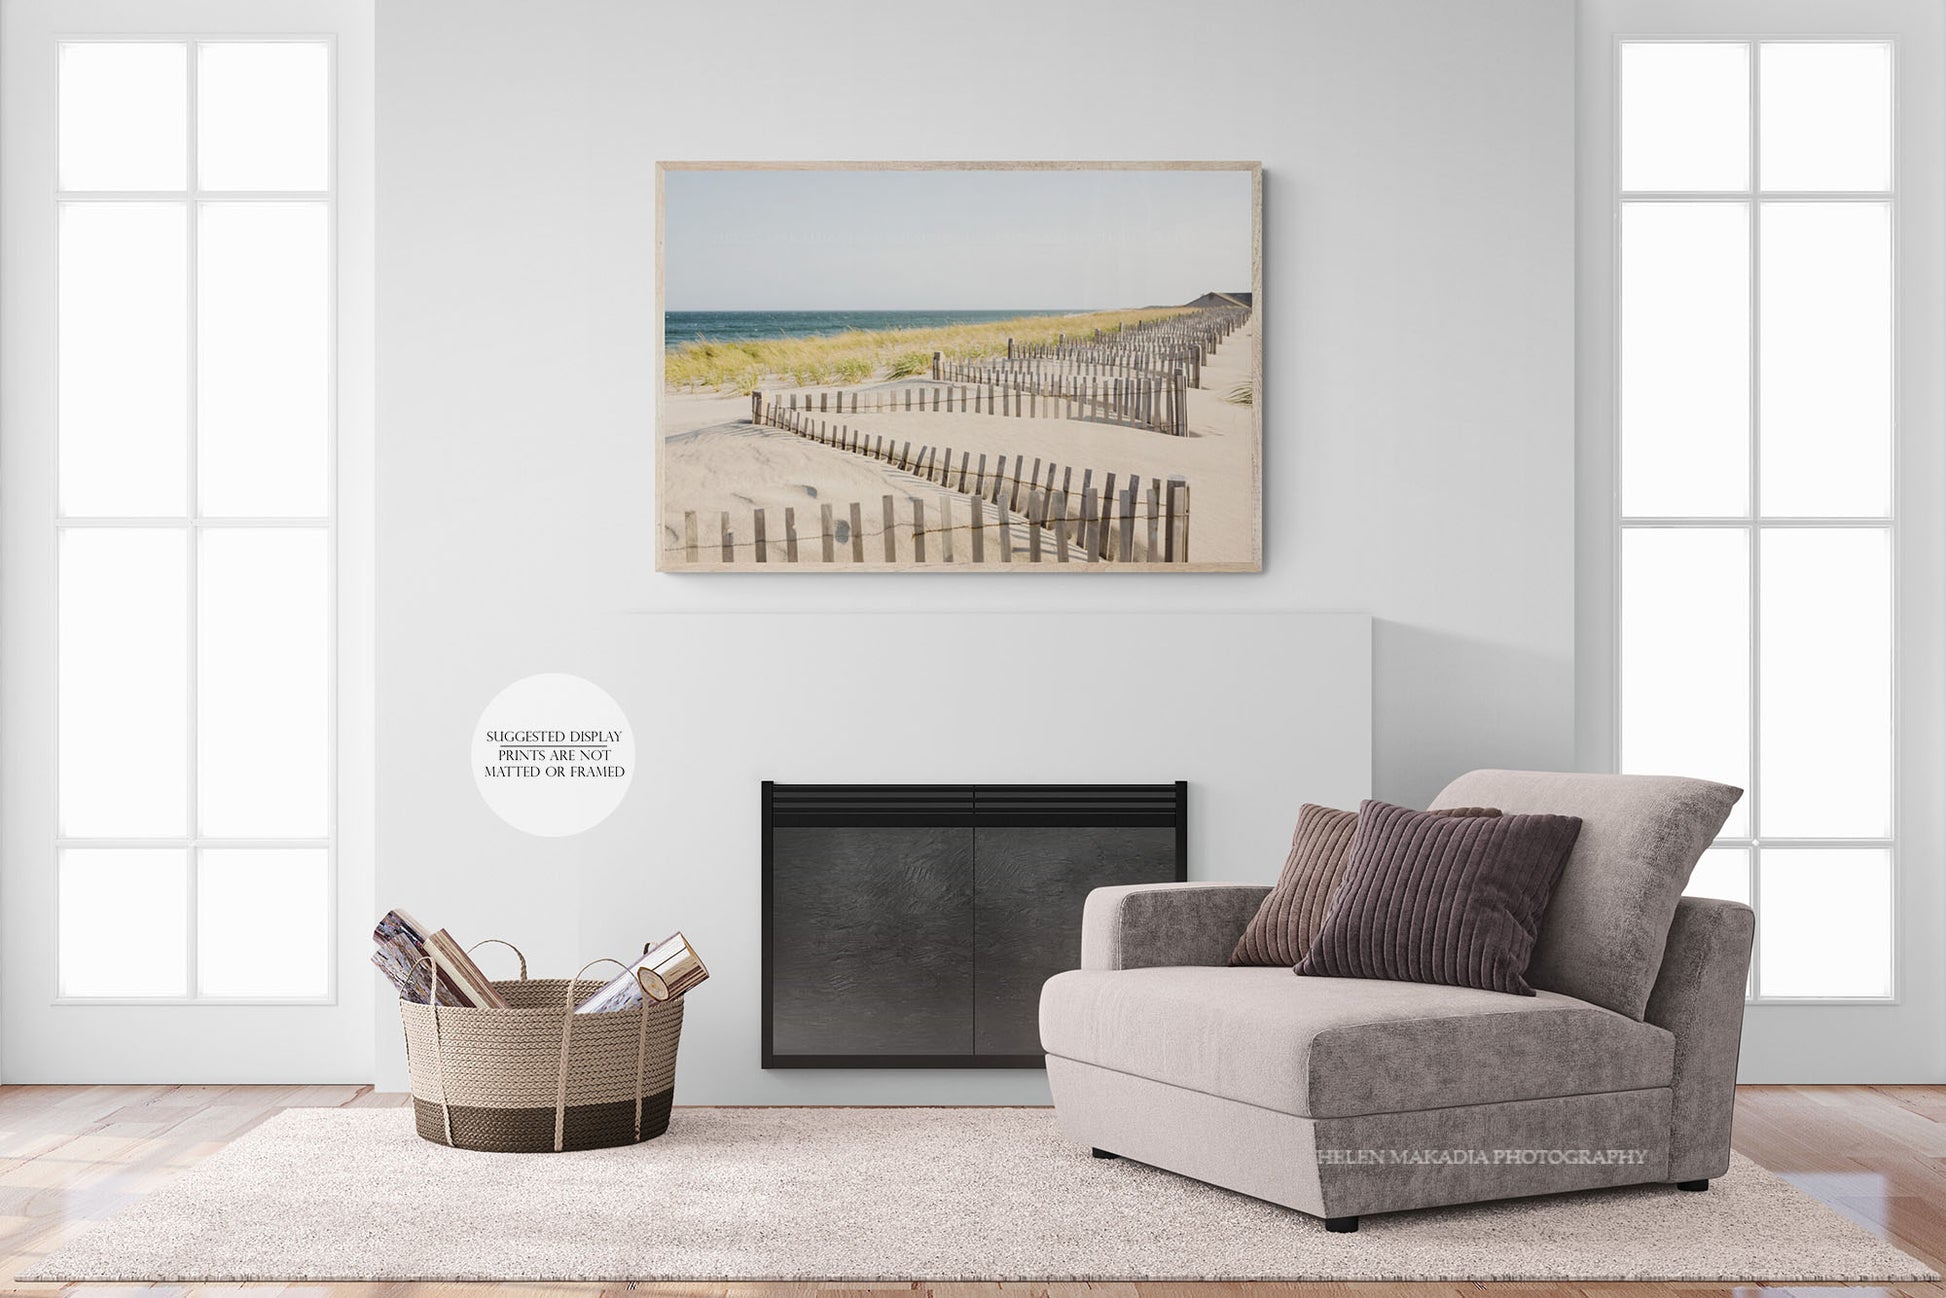 Nauset Beach Fences and Sand Wall Art in a Living Room